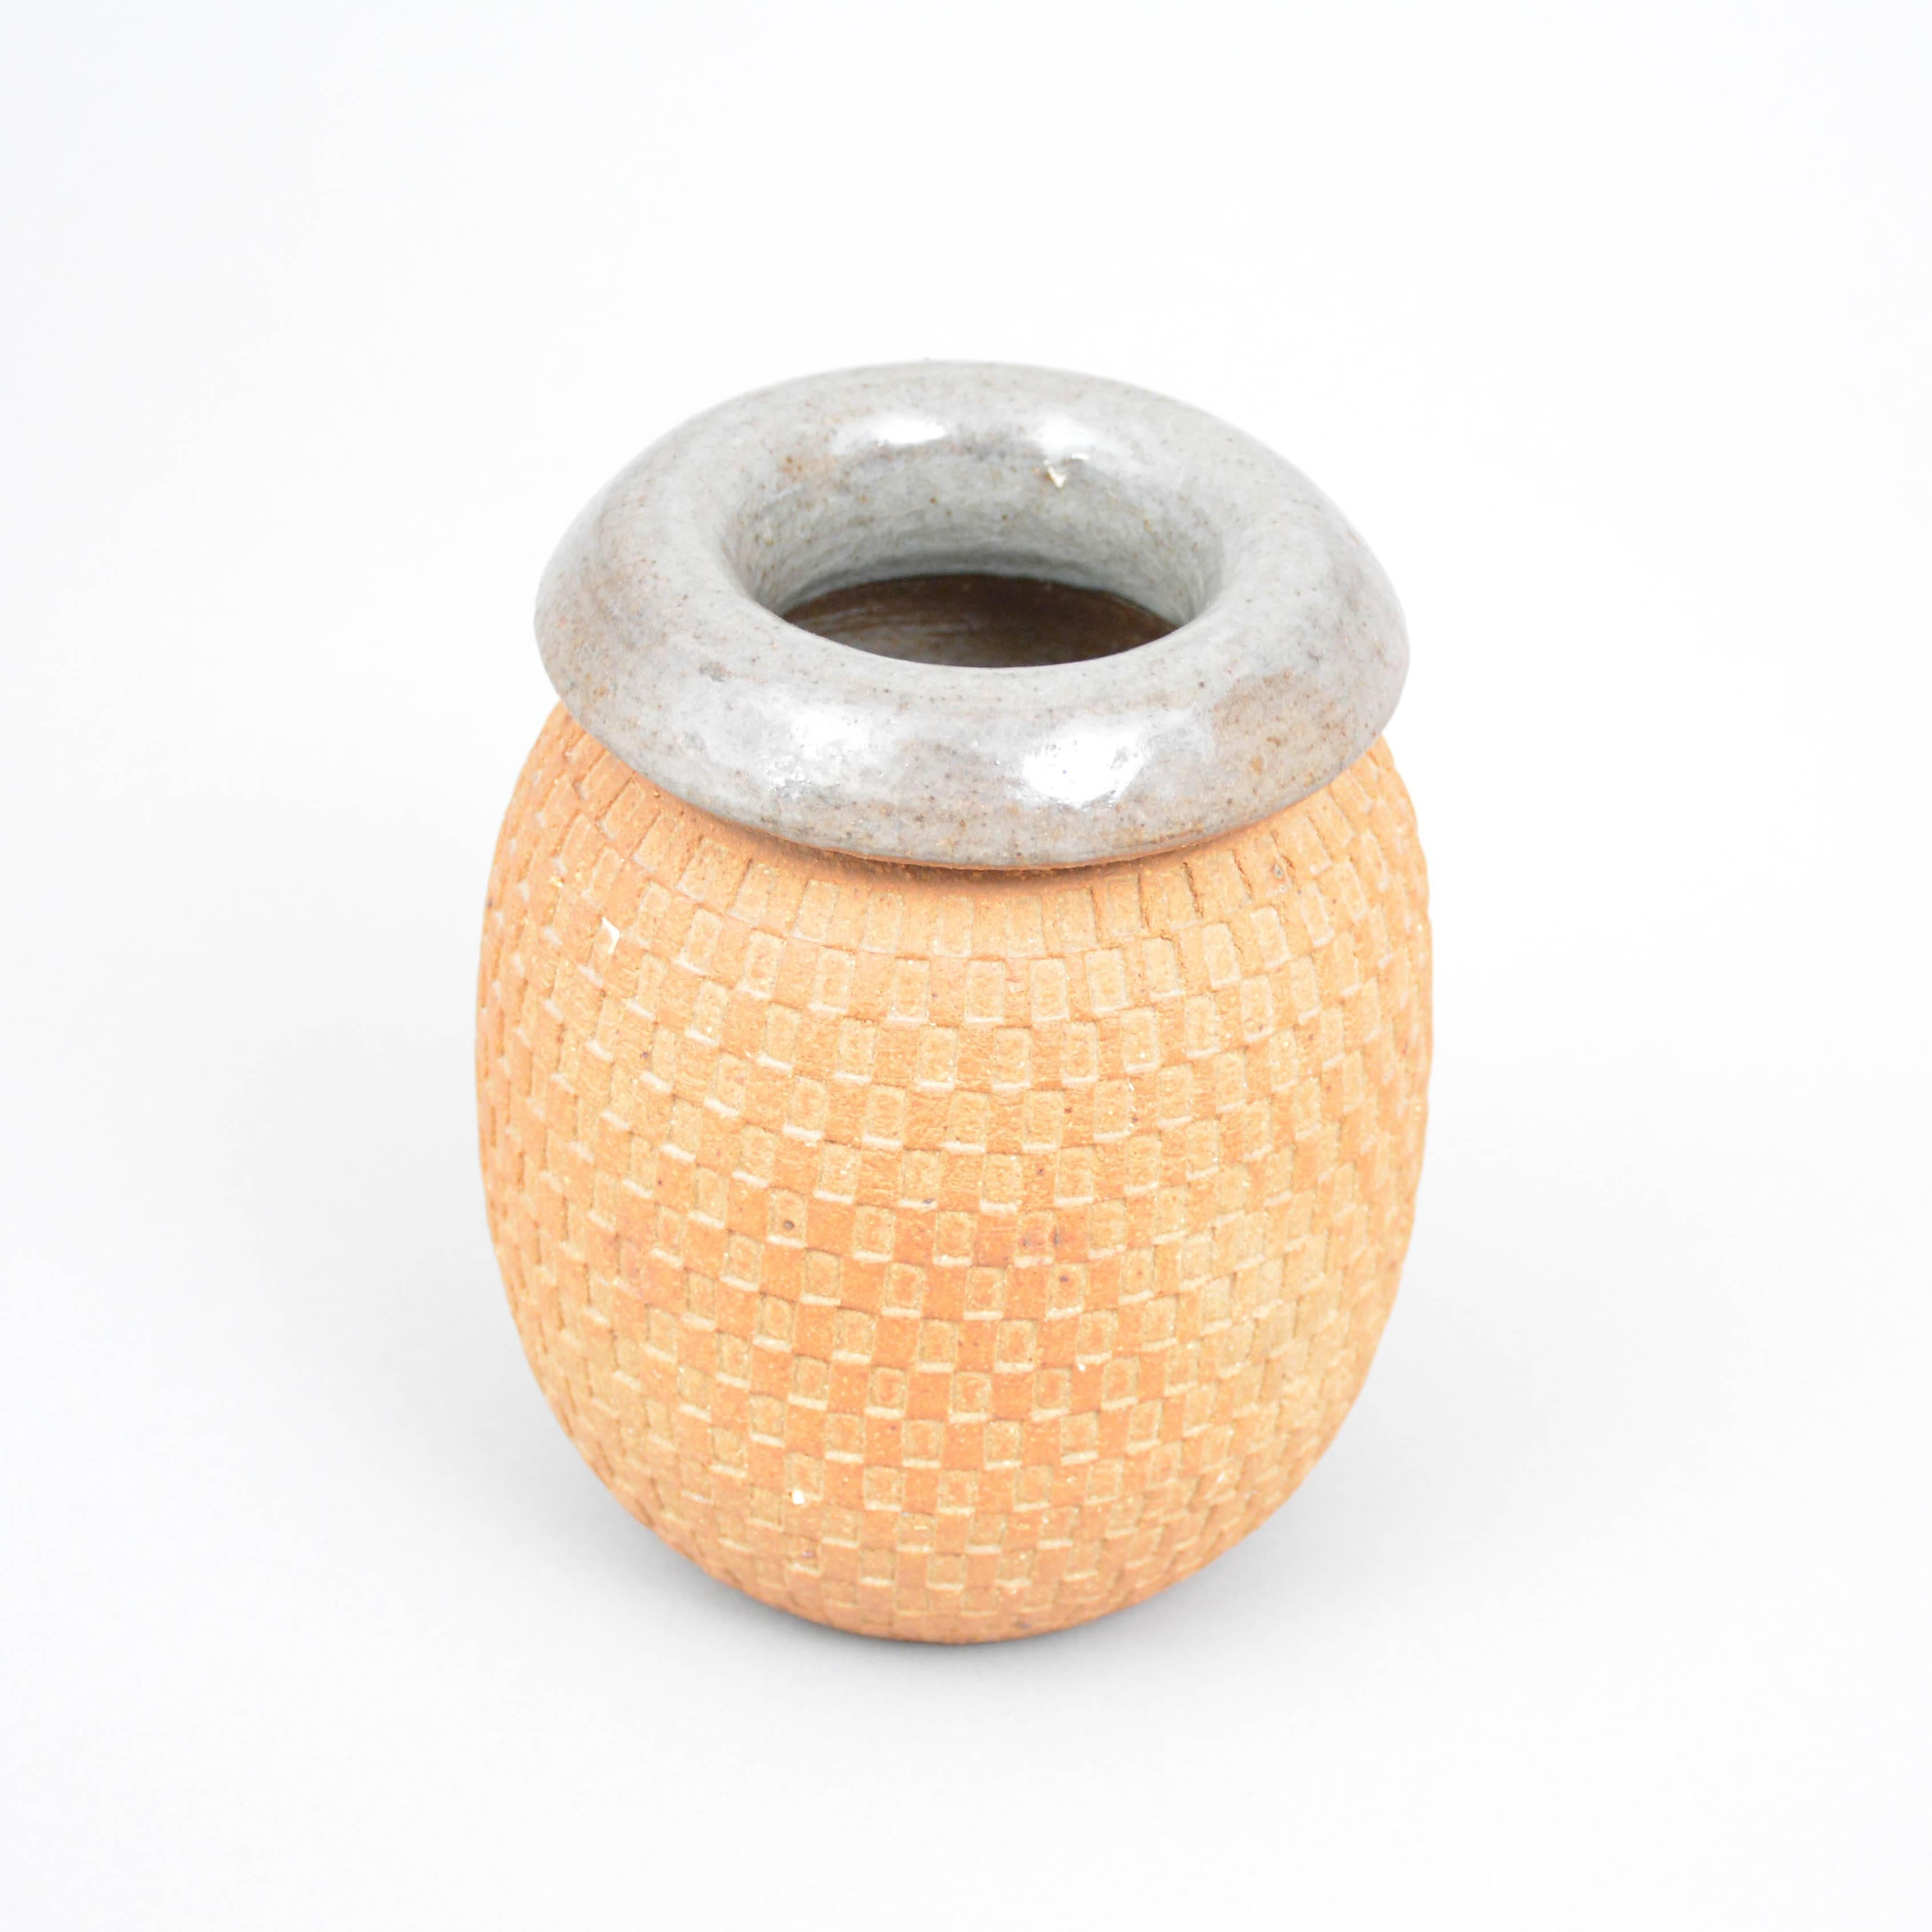 A rare and unique stoneware vase by Stig Lindberg for Gustavsberg, Sweden. Signed and dated 1962. The inside glazed in celadon to light grey glaze. The outside unglazed.